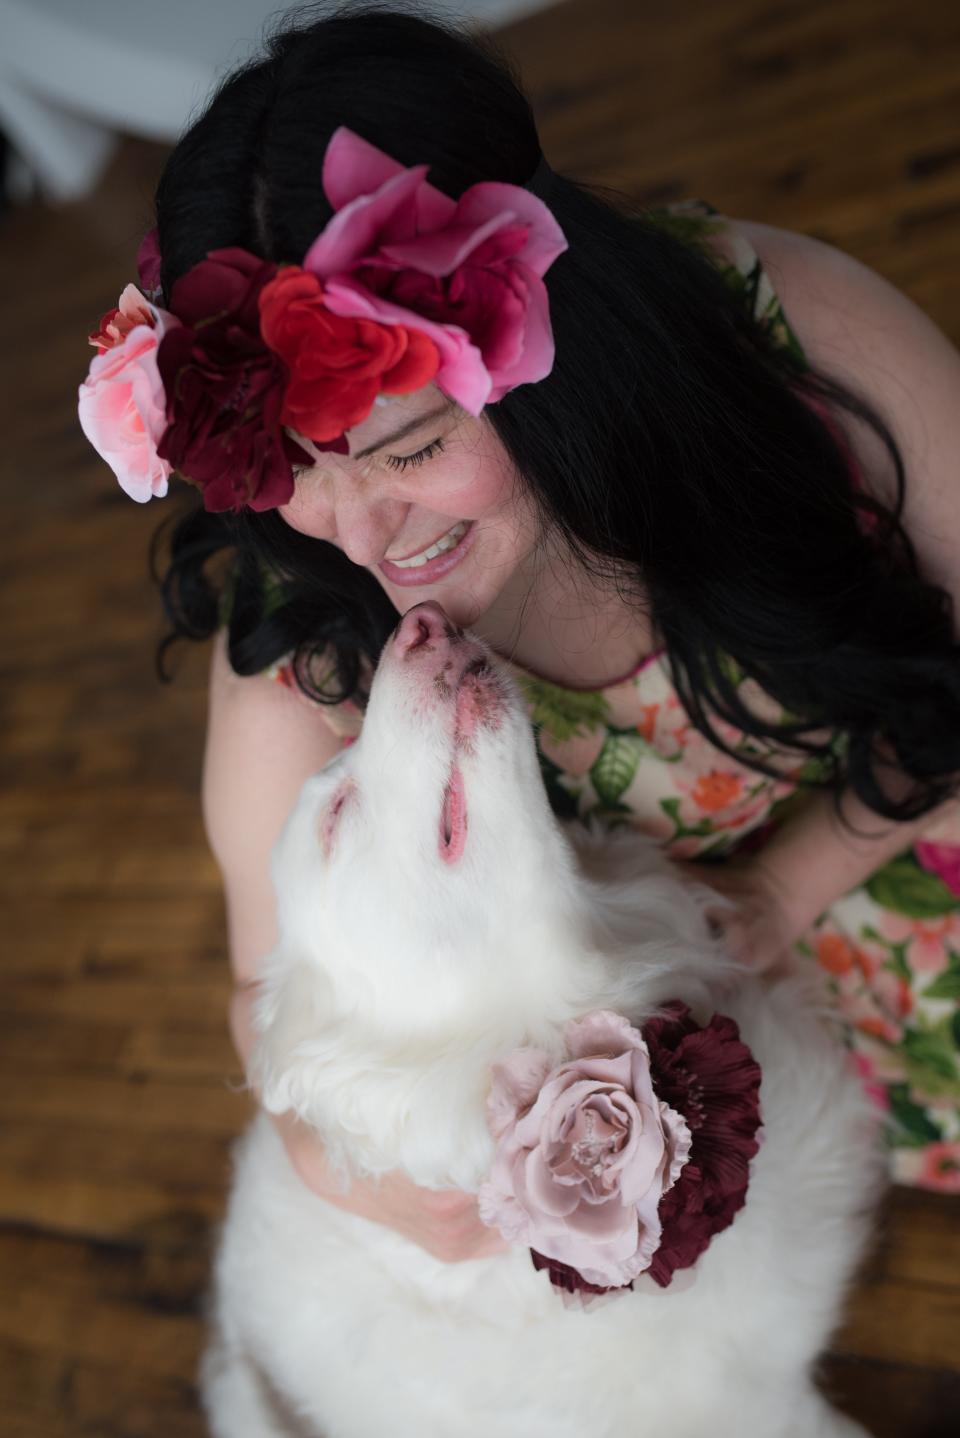 Kristen Strouse models with her dog, Raina, who is a semi-finalist for this year's "Oscars for dogs" in recognition of her community service work and perseverance while being born blind and deaf.